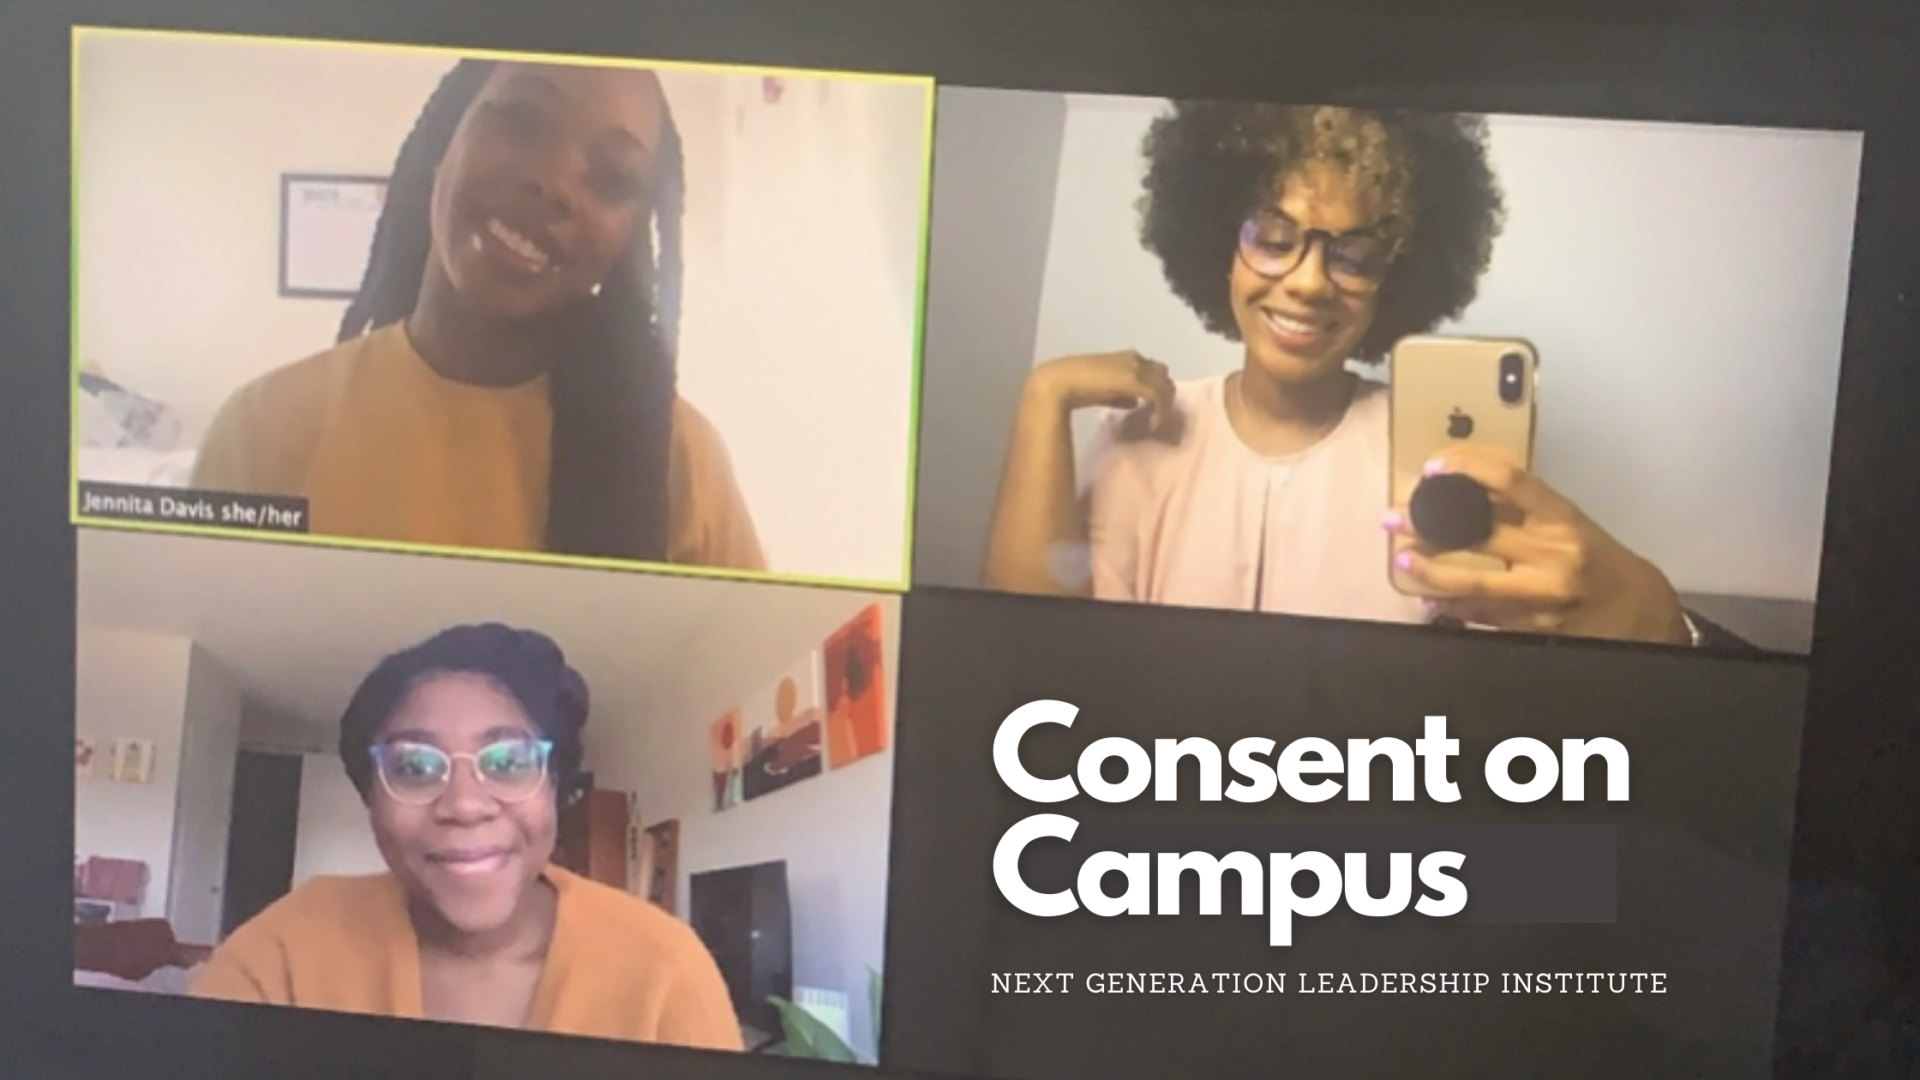 My Hair is Bomb”: Black Girls' Identities and Resistance, by National  Center for Institutional Diversity, Spark: Elevating Scholarship on Social  Issues